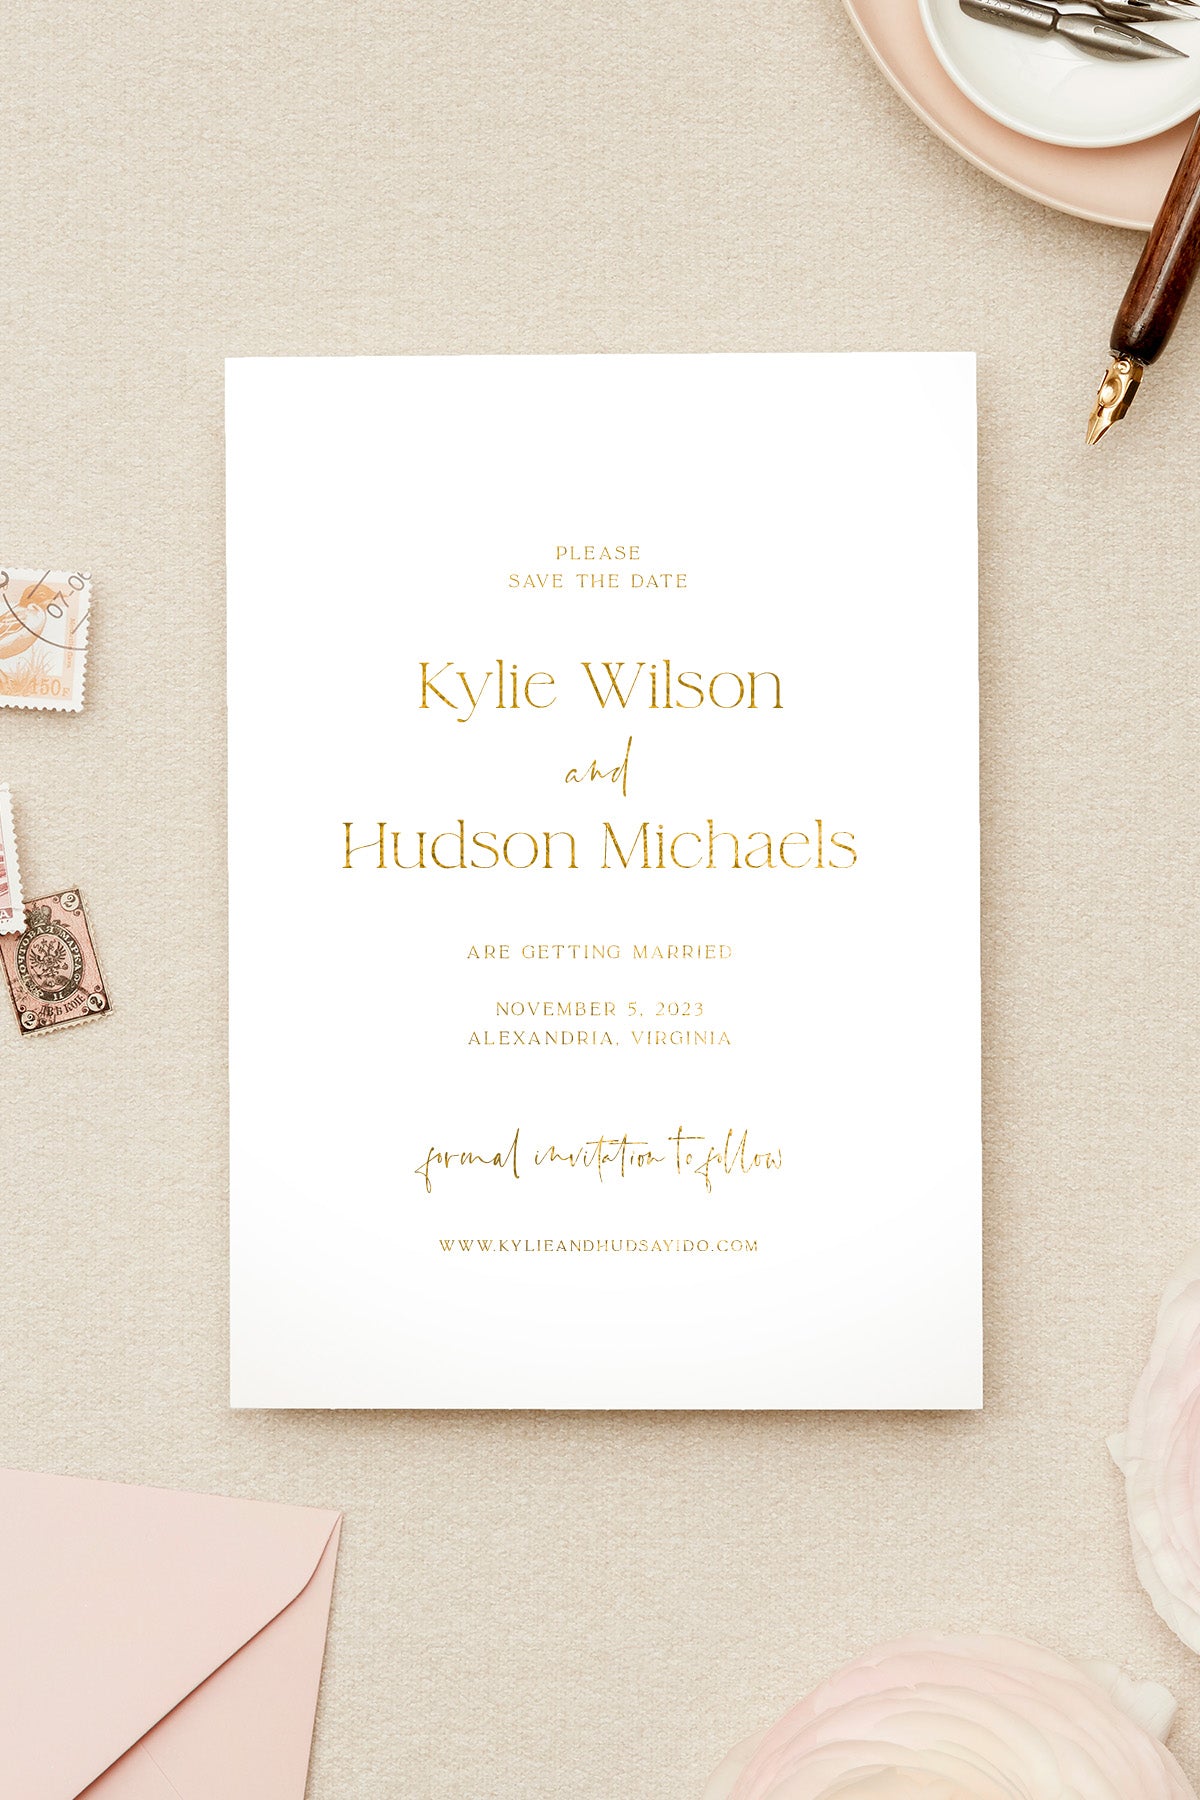 Foil Save The Date Cards